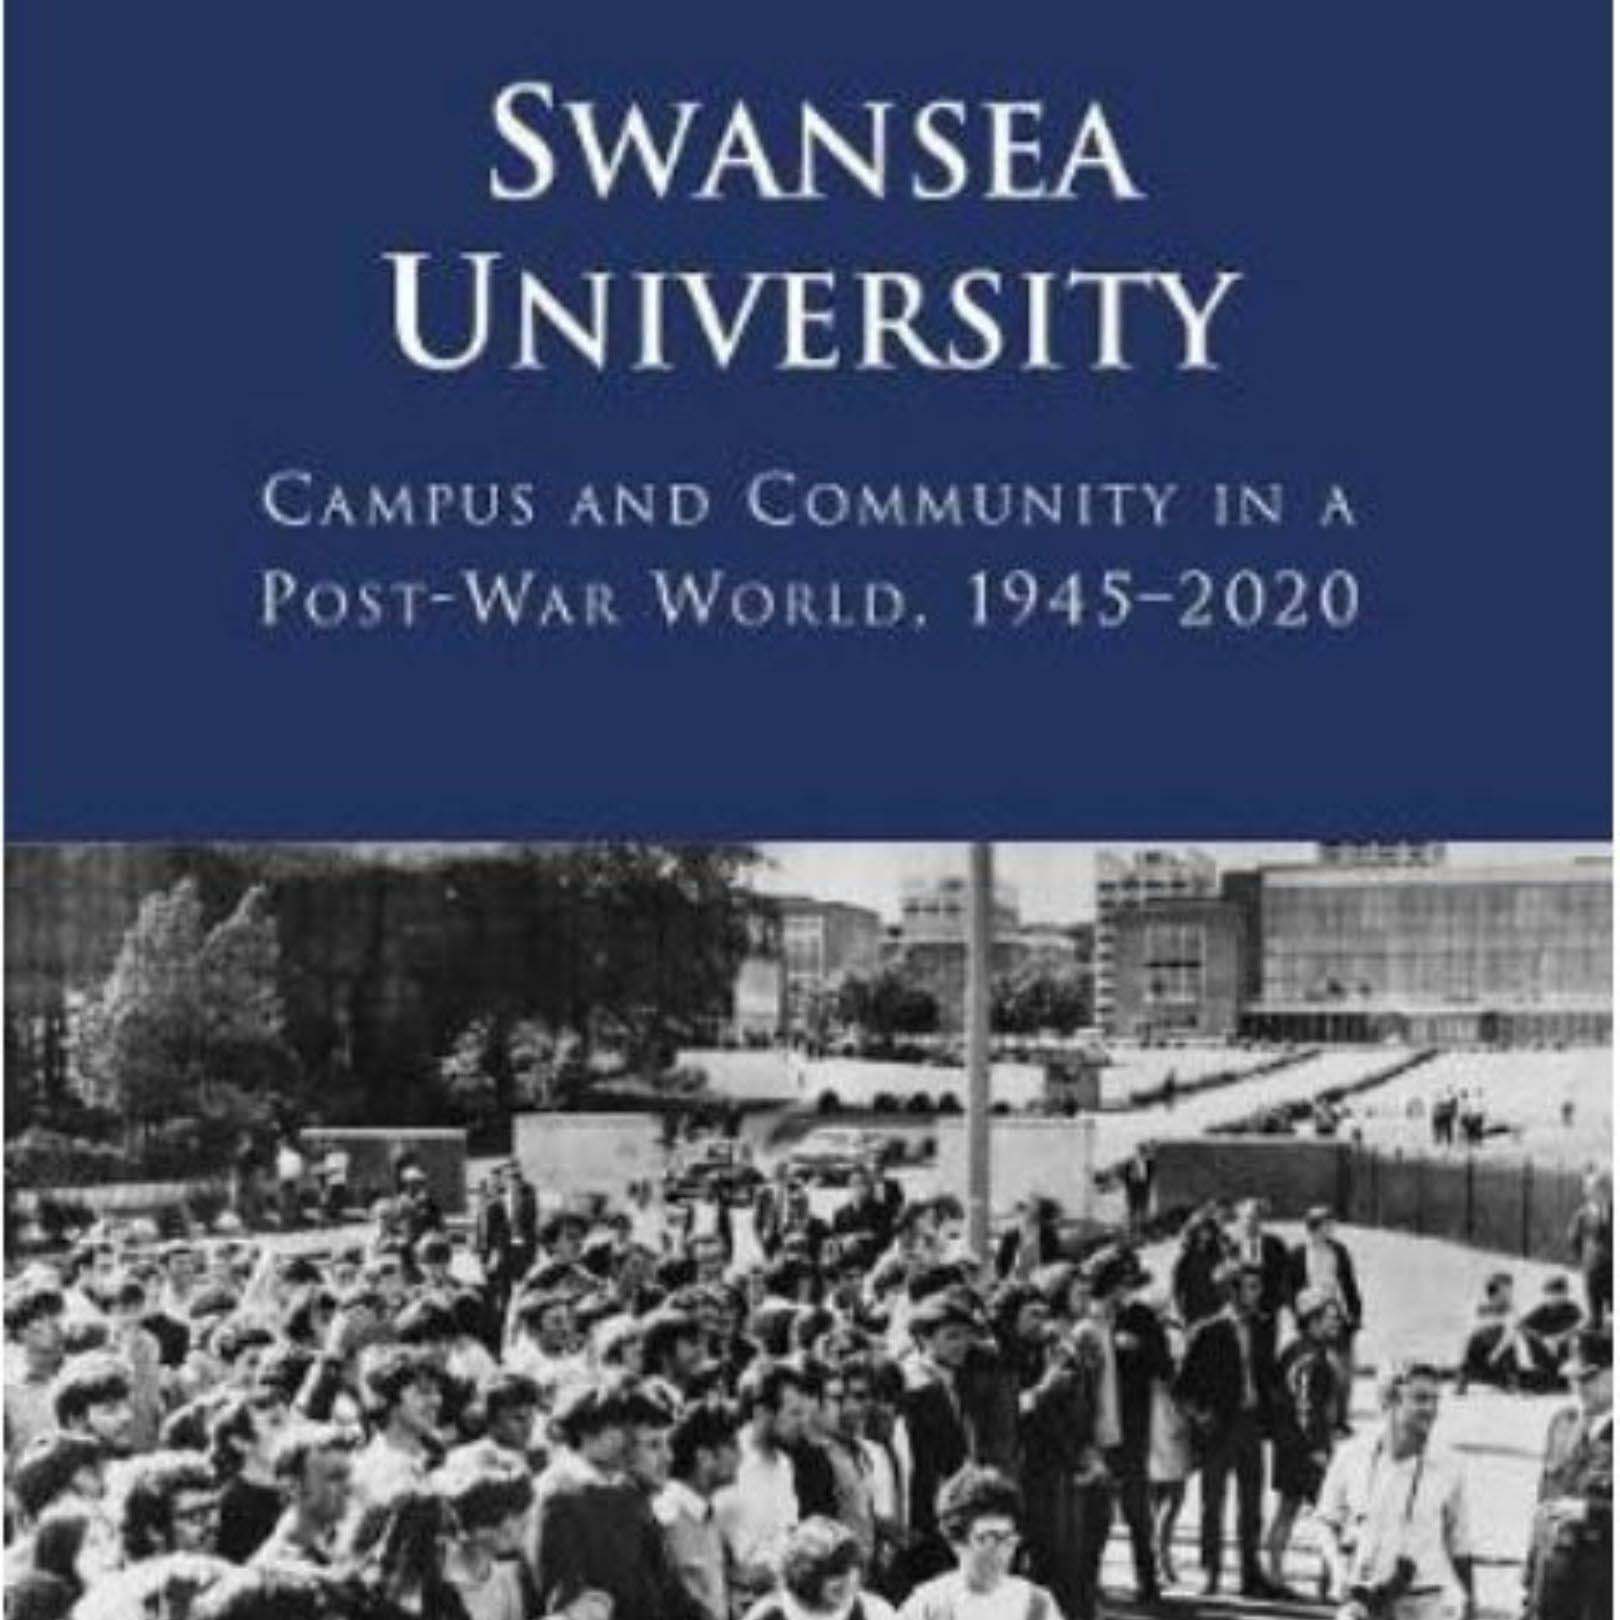 Swansea University: Campus and Community in a Post-War World, 1945-2020